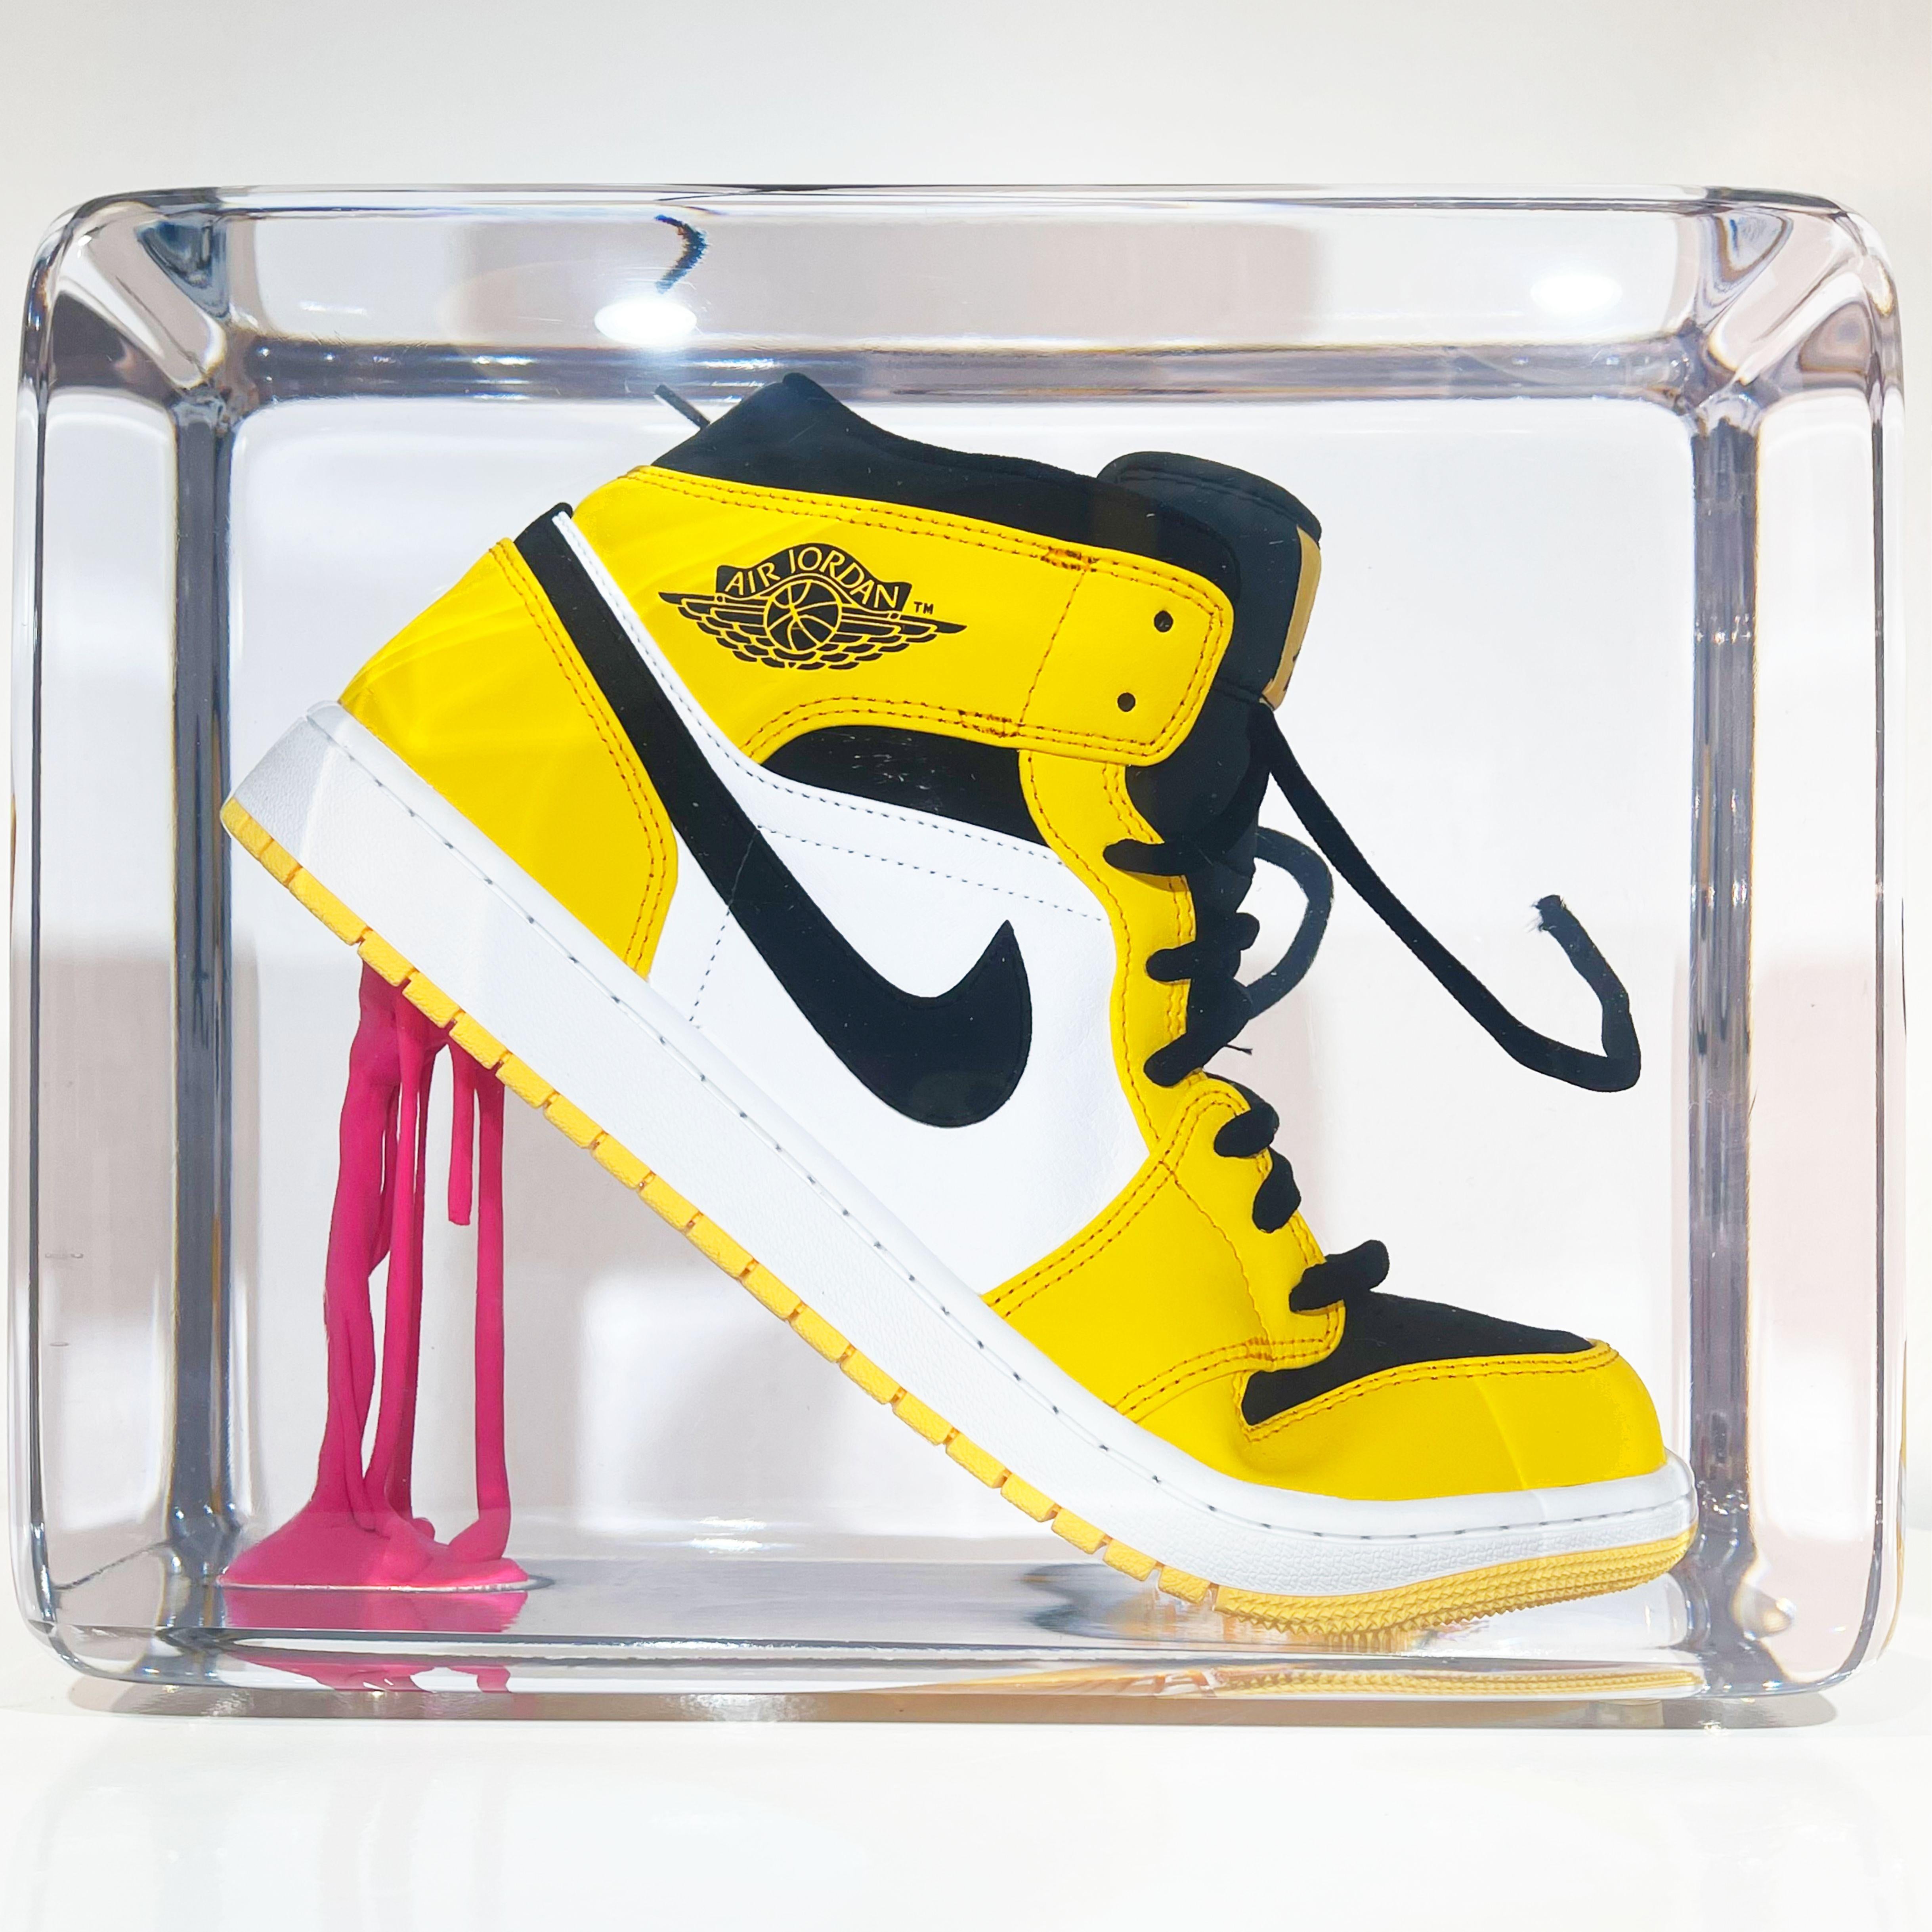 Sneakers & Gum Taxi Yellow tone Sculpture Edition 03/20